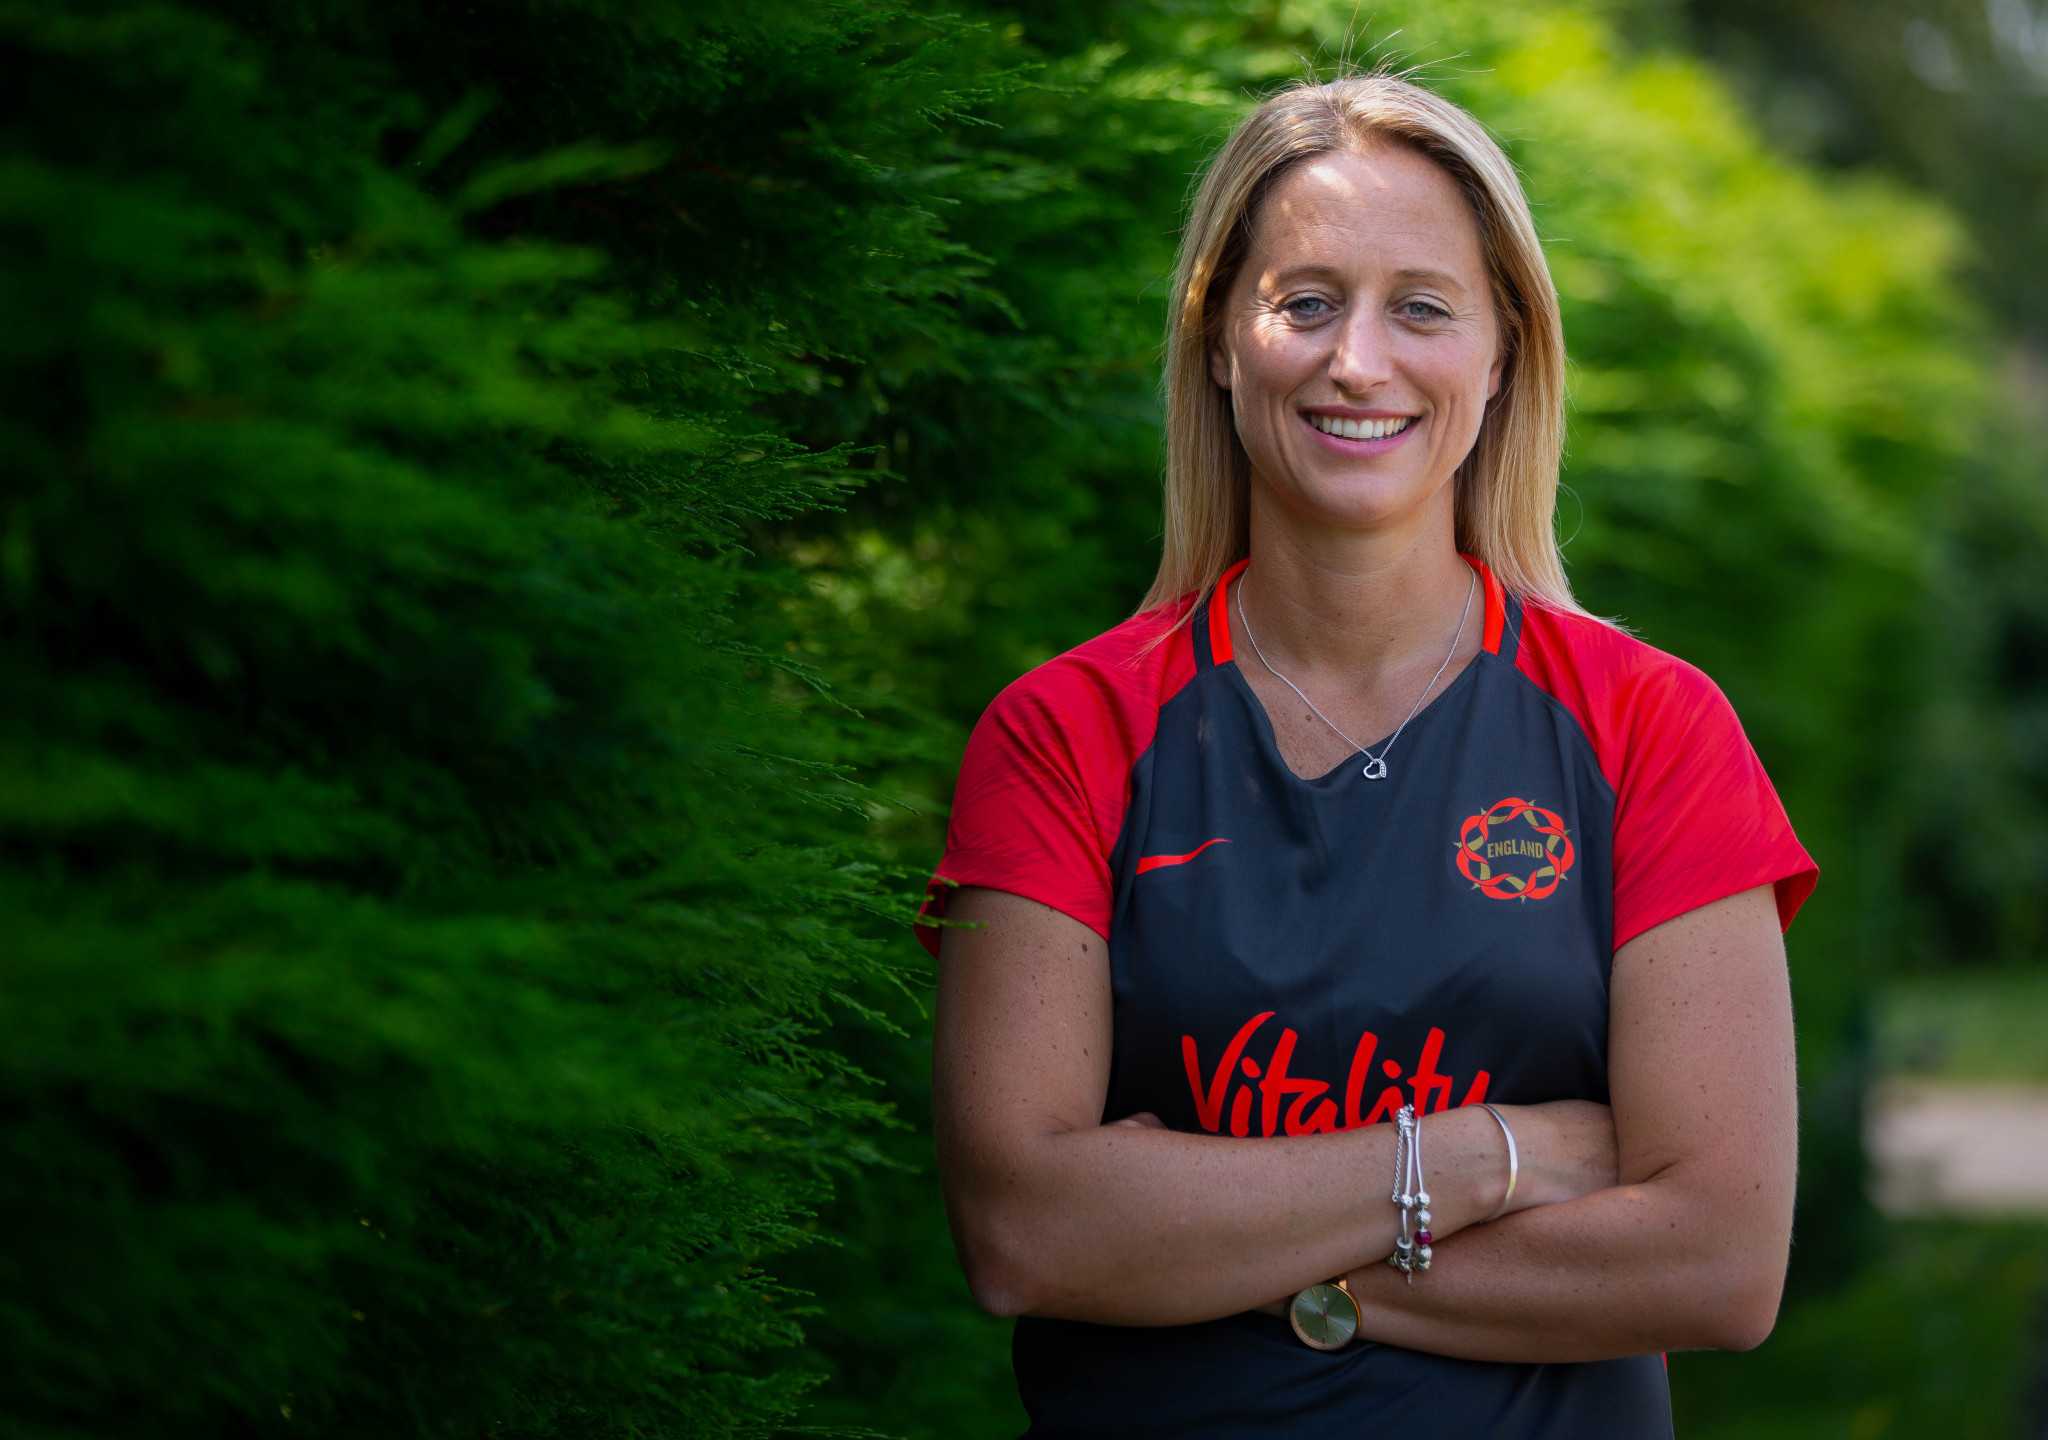 Thirlby appointed to replace Neville as England netball head coach